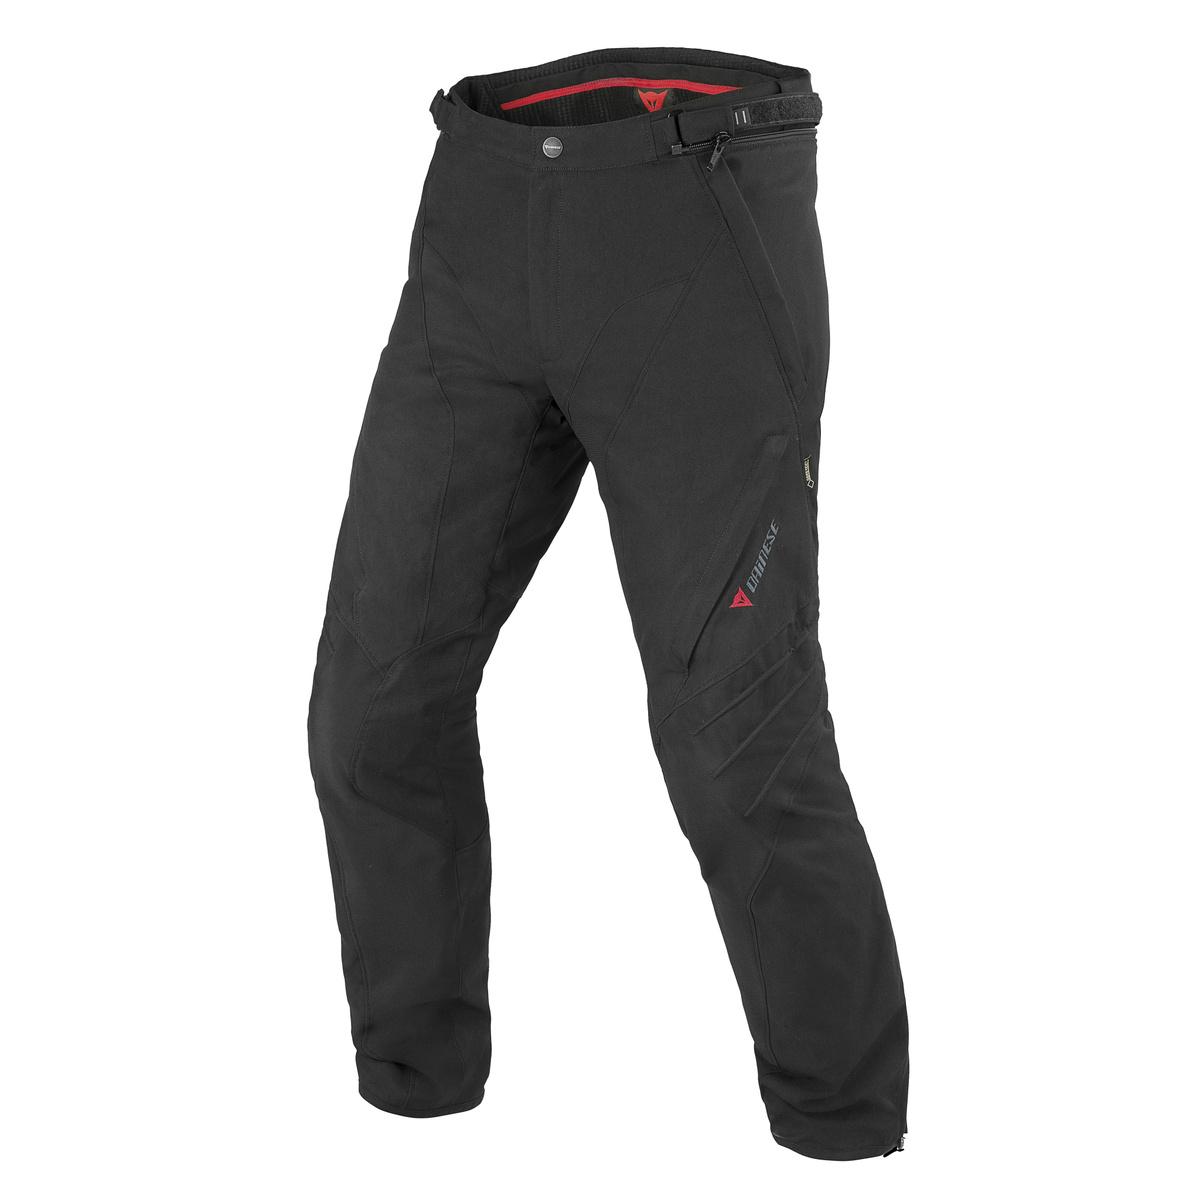 Review Dainese GoreTex Jacket Pants Riding Outfit  Women Riders Now